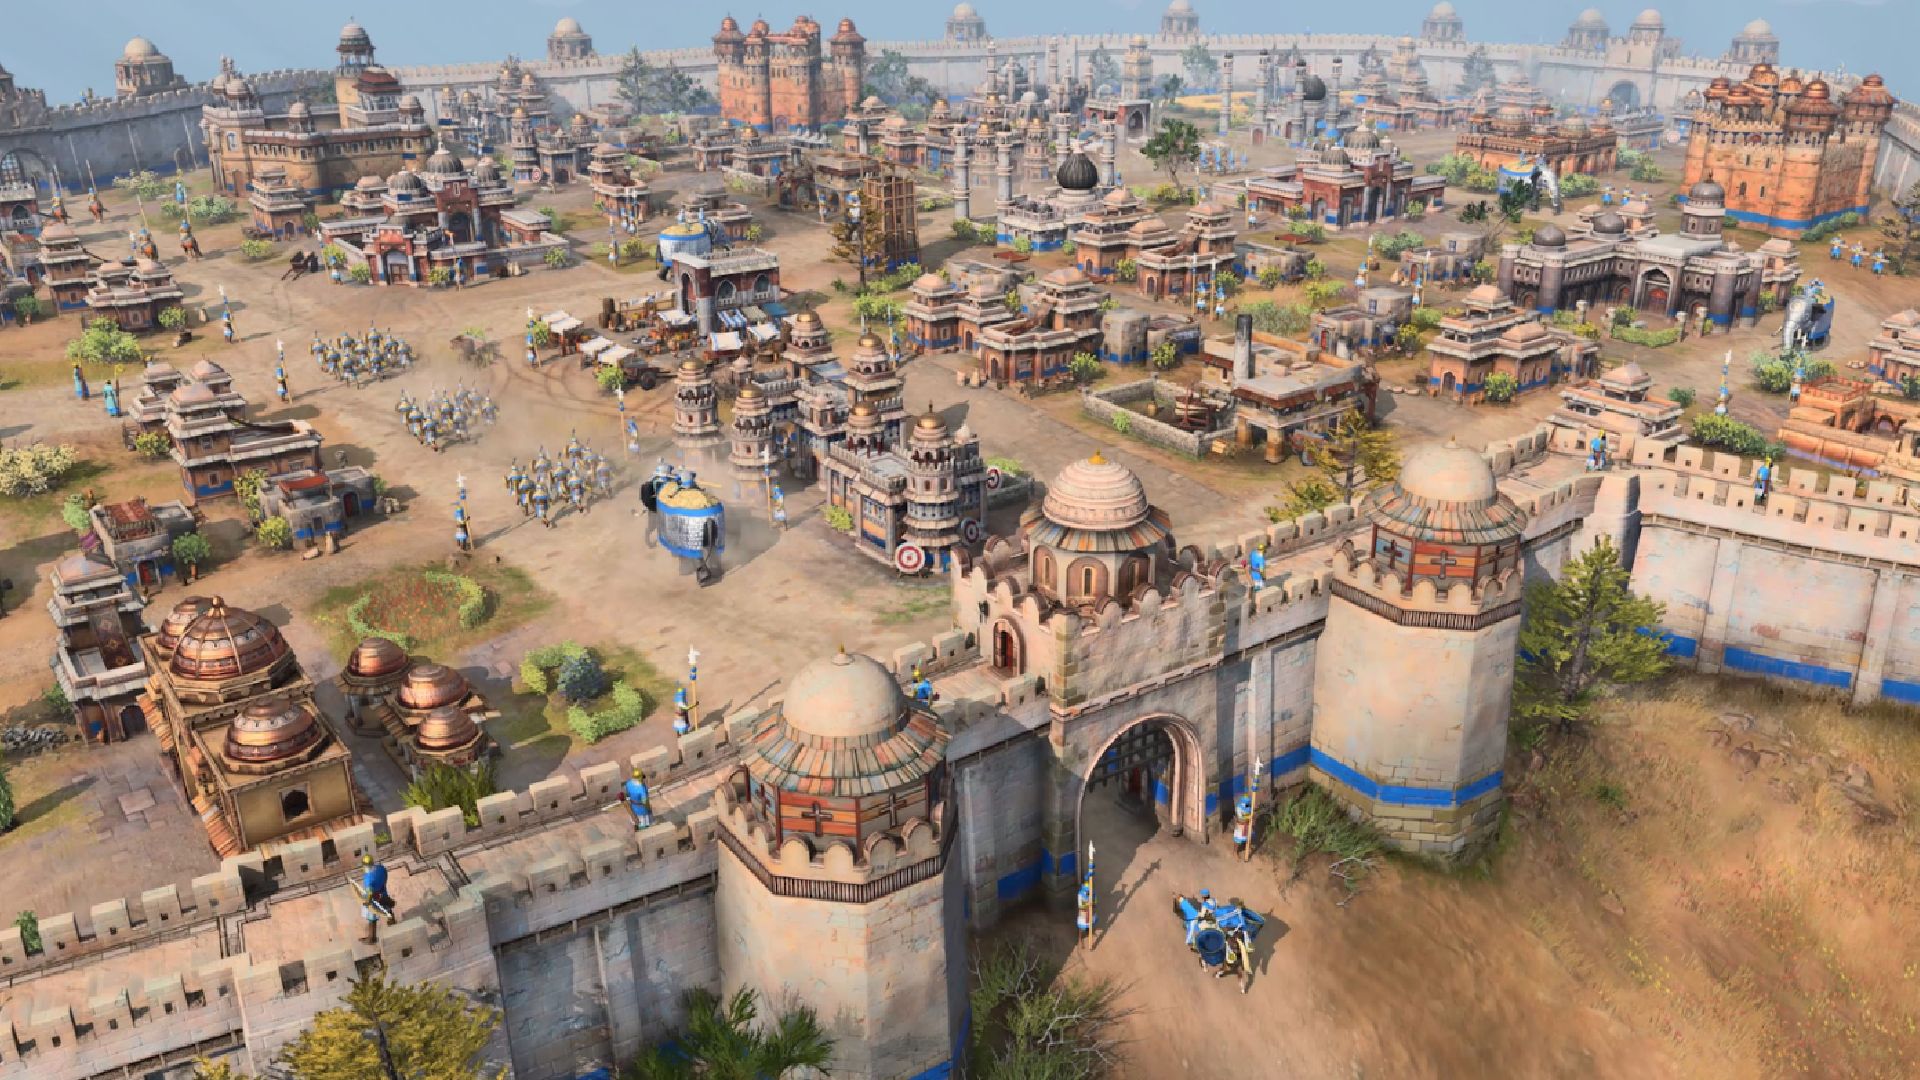 Age of Empires 4 Xbox Release Date: A large empire can be seen